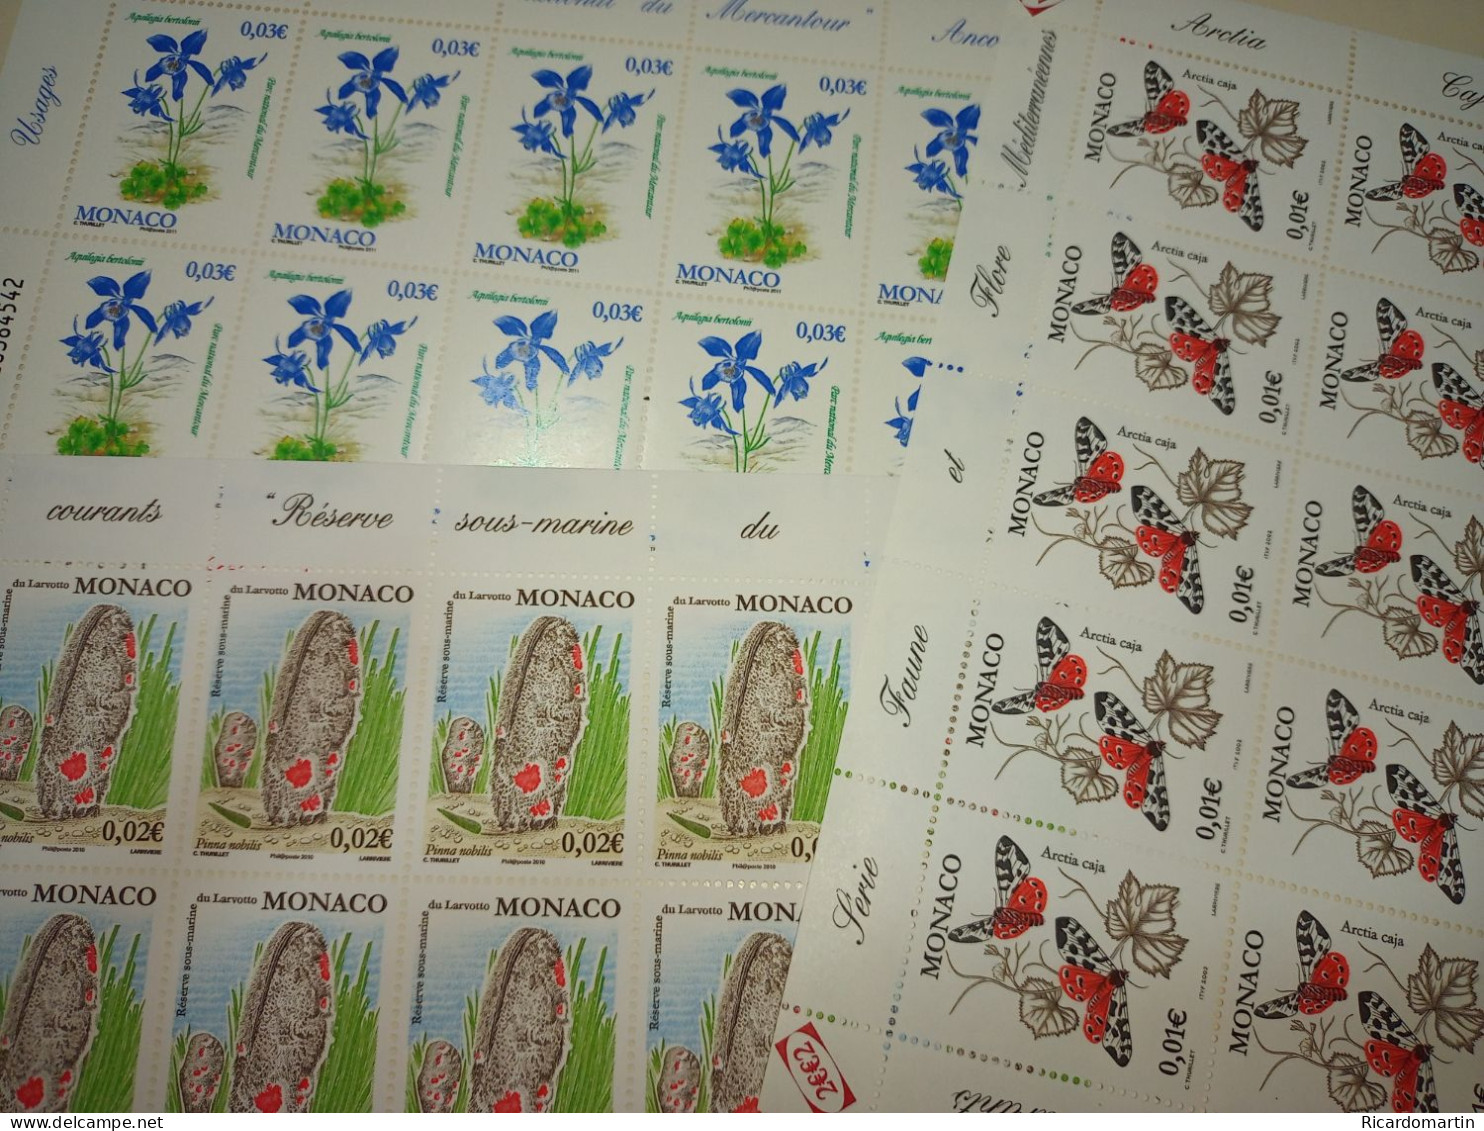 30 MONACO STAMPS, BUTTERFLY, ORCHID, FLOWER, MARINE LIFE, FAUNA, FLORA.KILOWARE - America (Other)